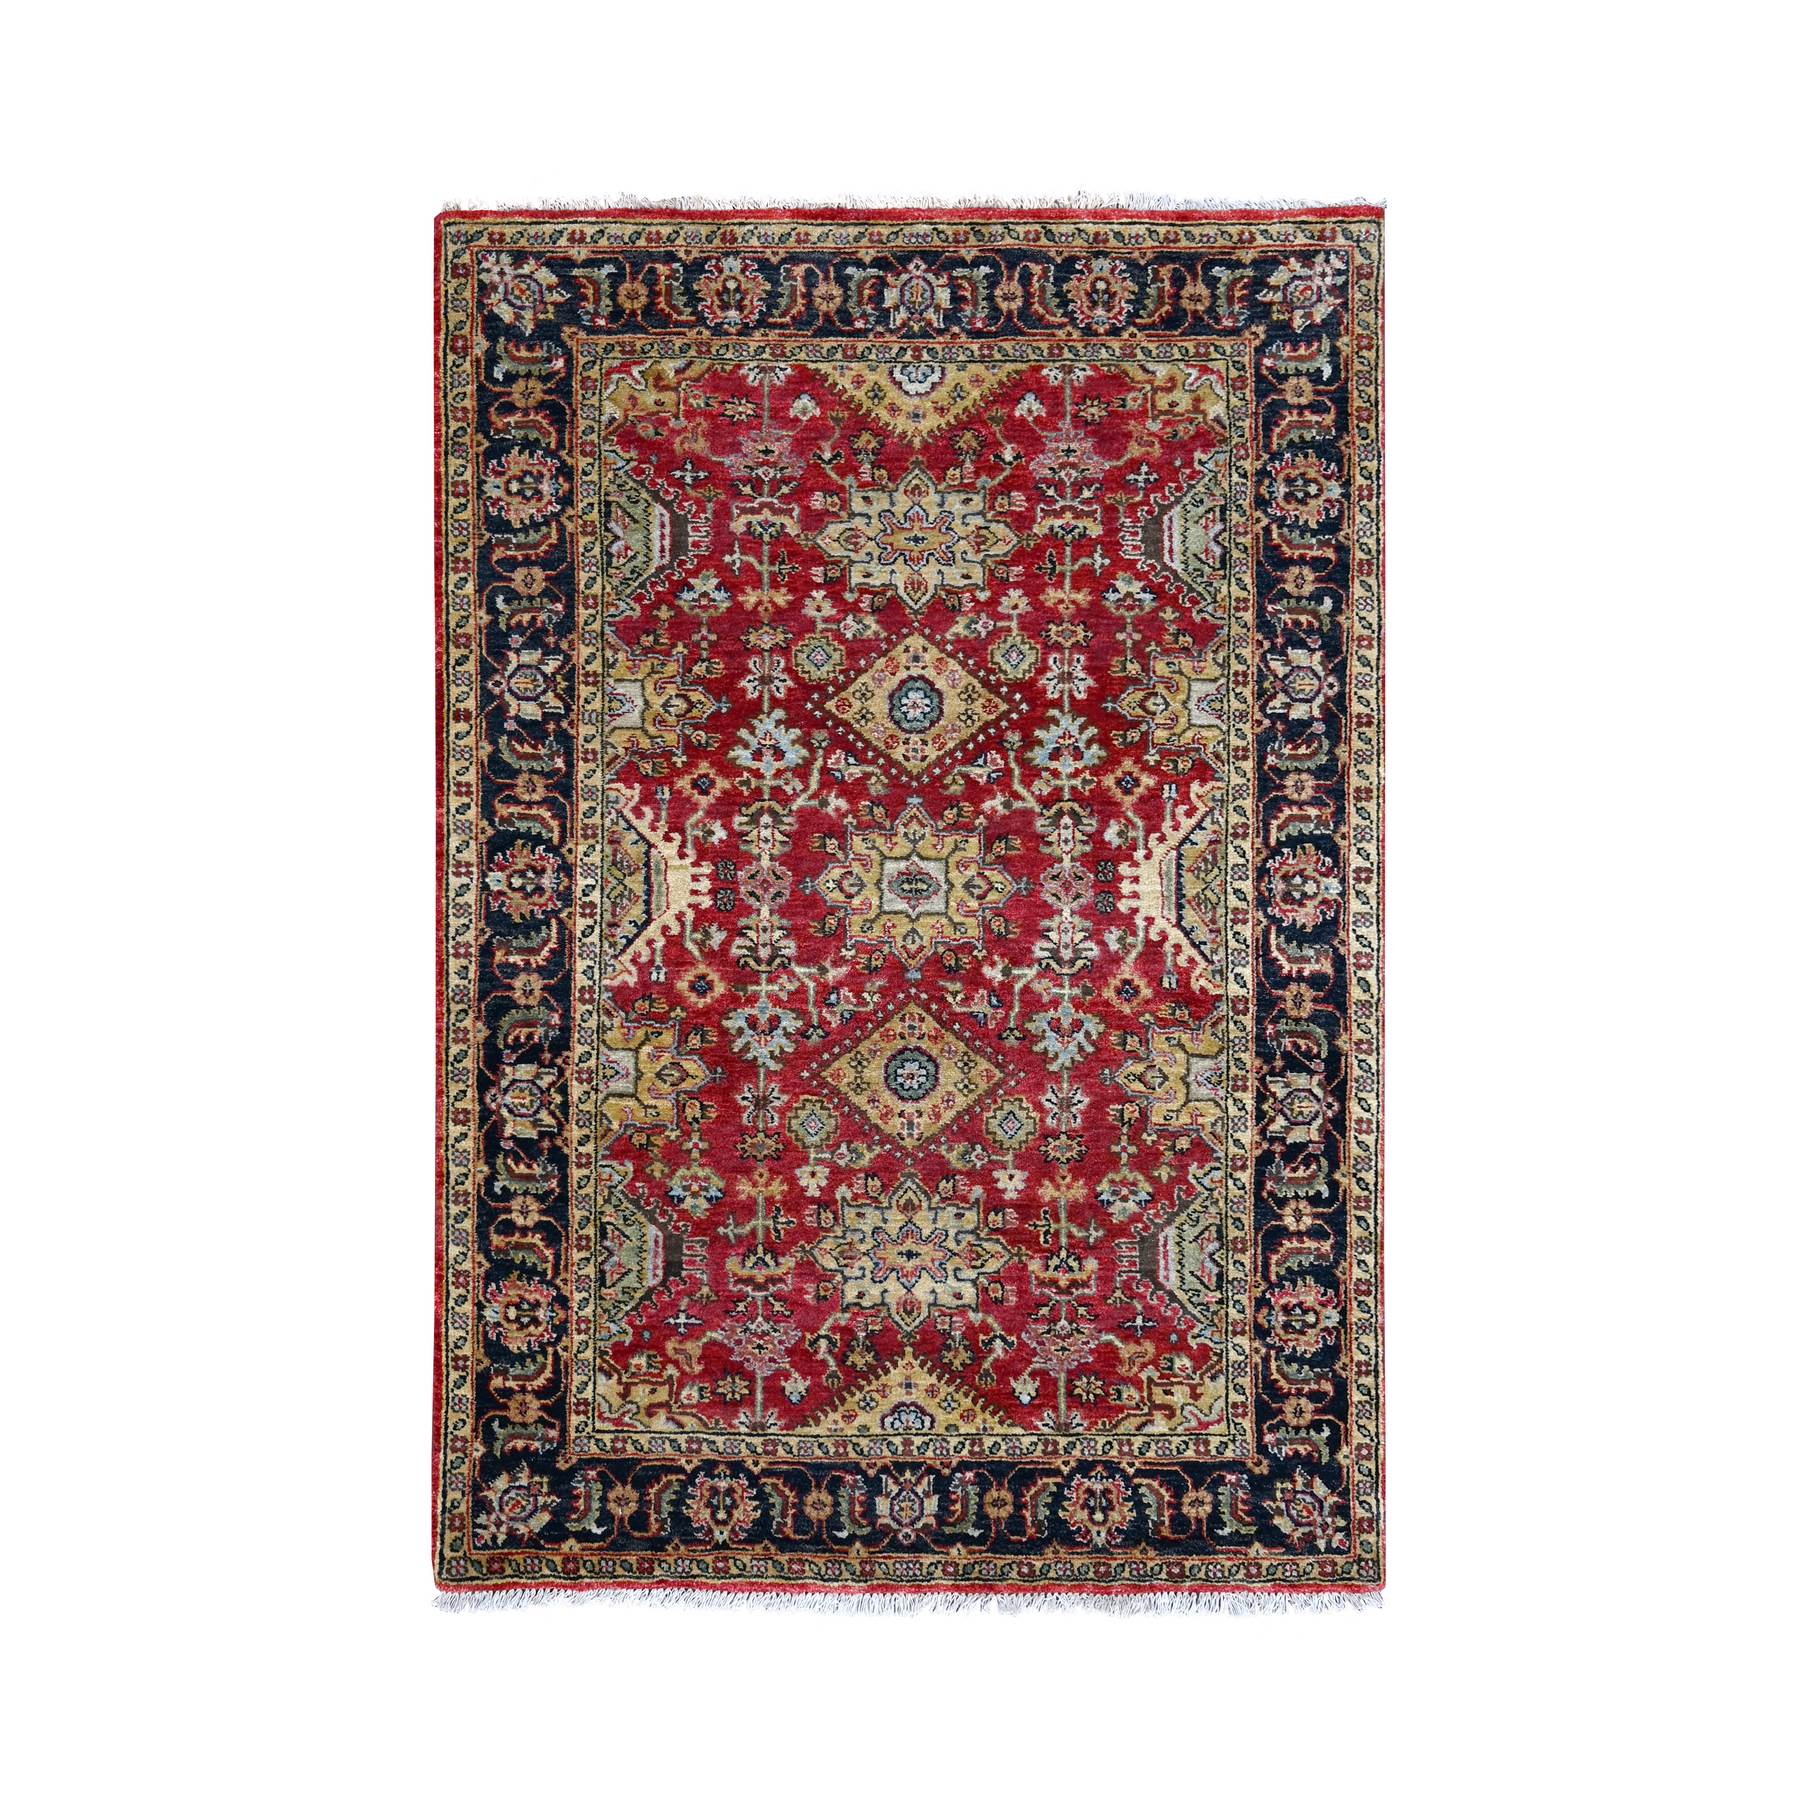  Wool Hand-Knotted Area Rug 4'1